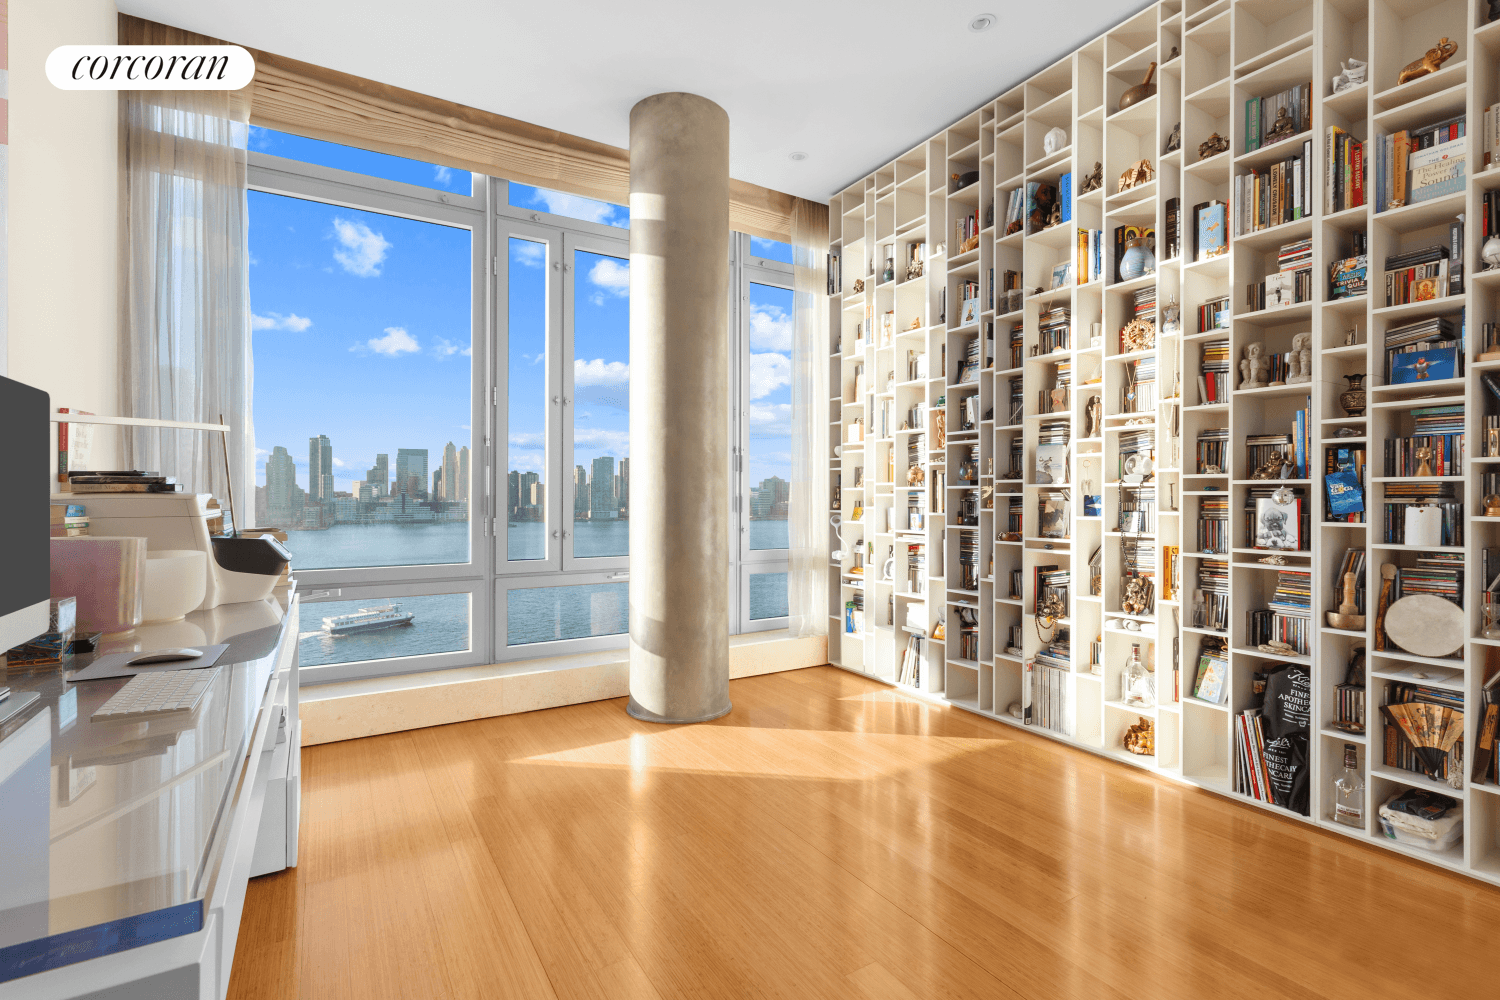 Located at 2 River Terrace, this high floor, loft like 3 BR 3 BA designer condo encompasses sweeping Hudson River and iconic Manhattan views of One World Trade, Statue of ...